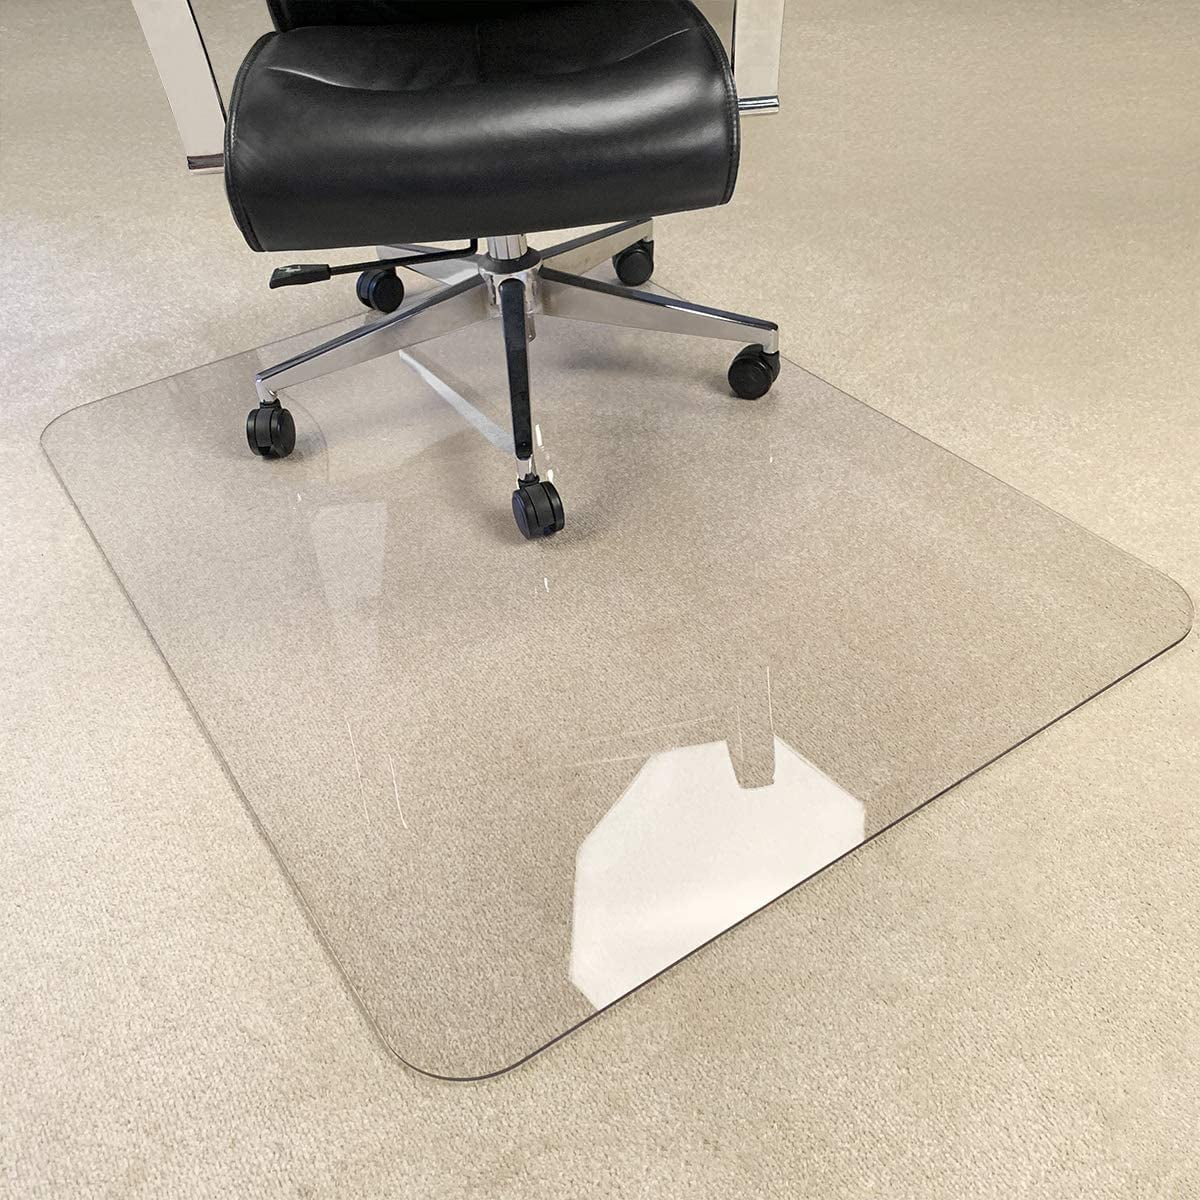 48" x 48" Large Square PVC Chair Floor Mat Home Office Protector Hard Wood Floor 